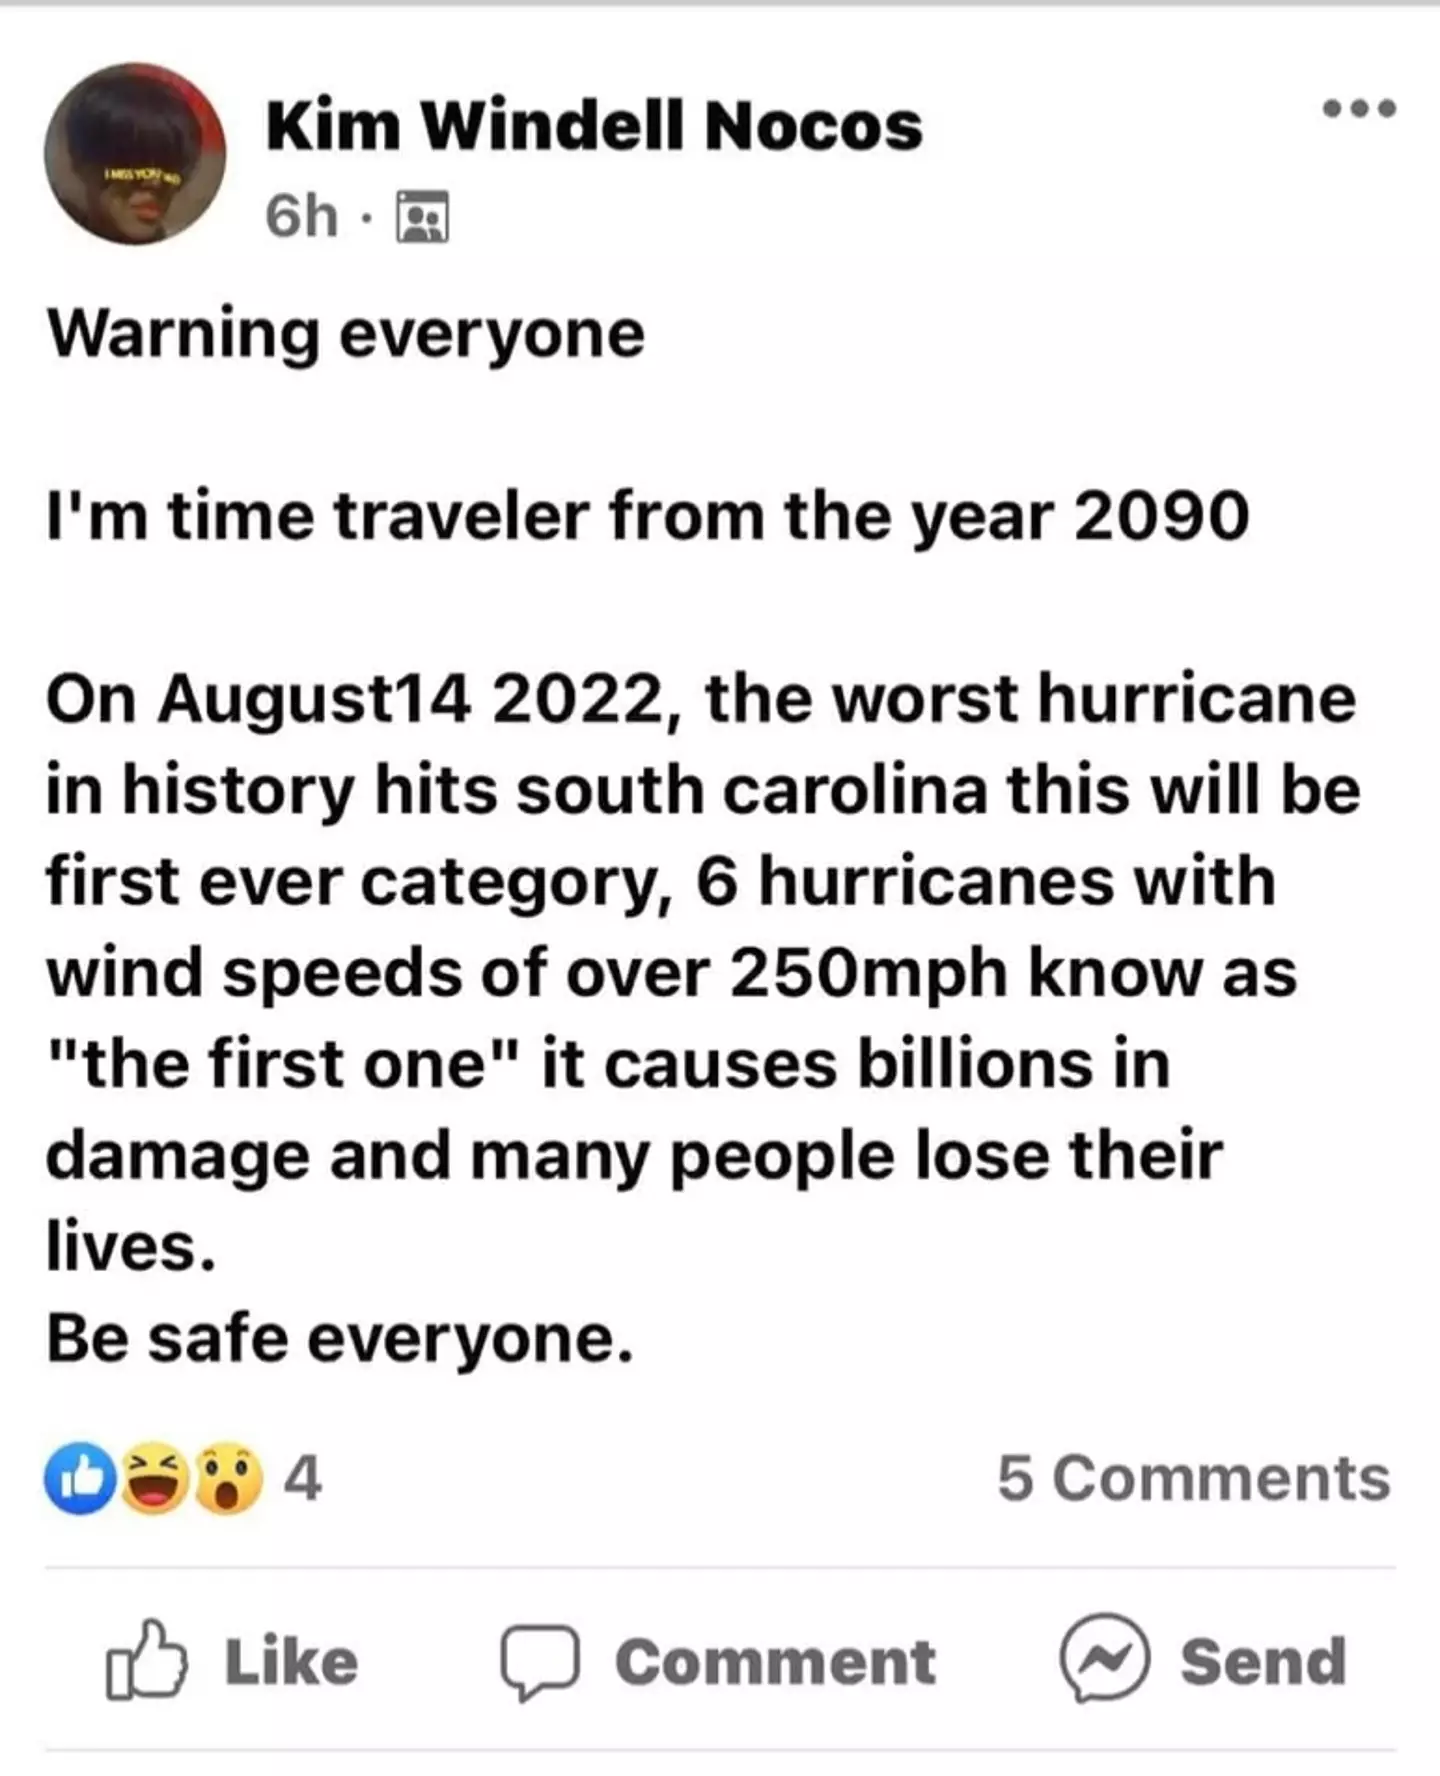 Kim warns that a mega hurricane set to hit the US in just a few days time.